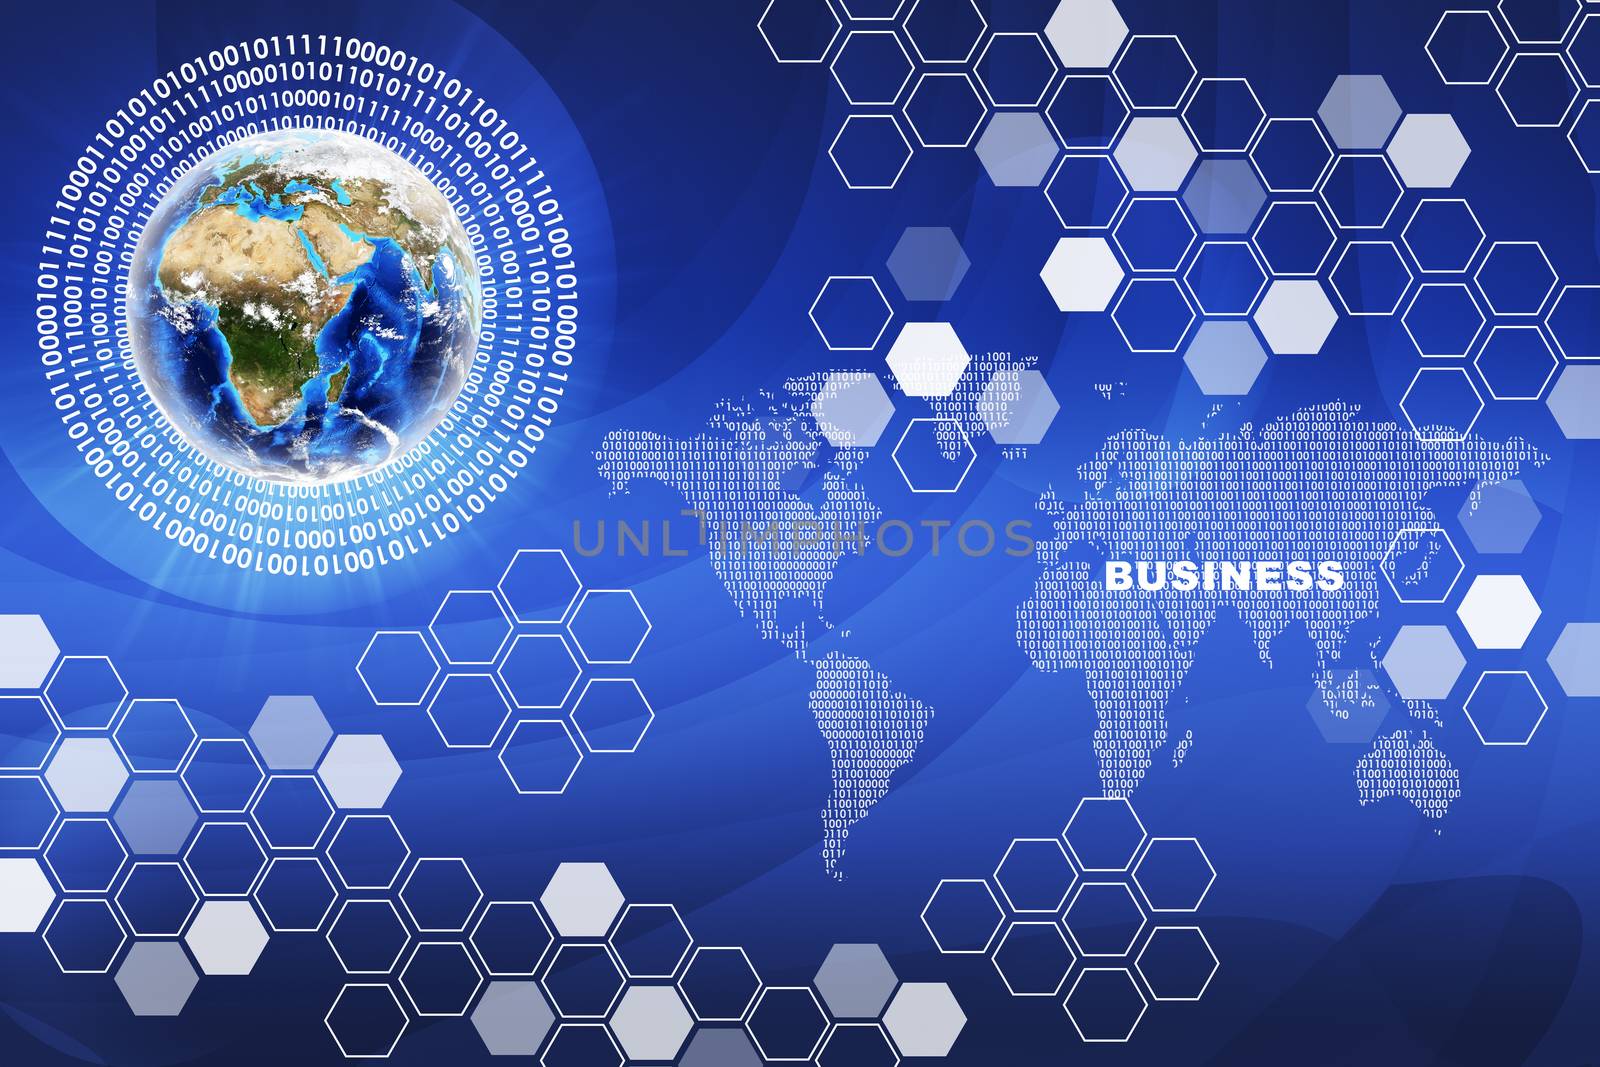 Earth with business words and world map on abstract blue background. Elements of this image furnished by NASA